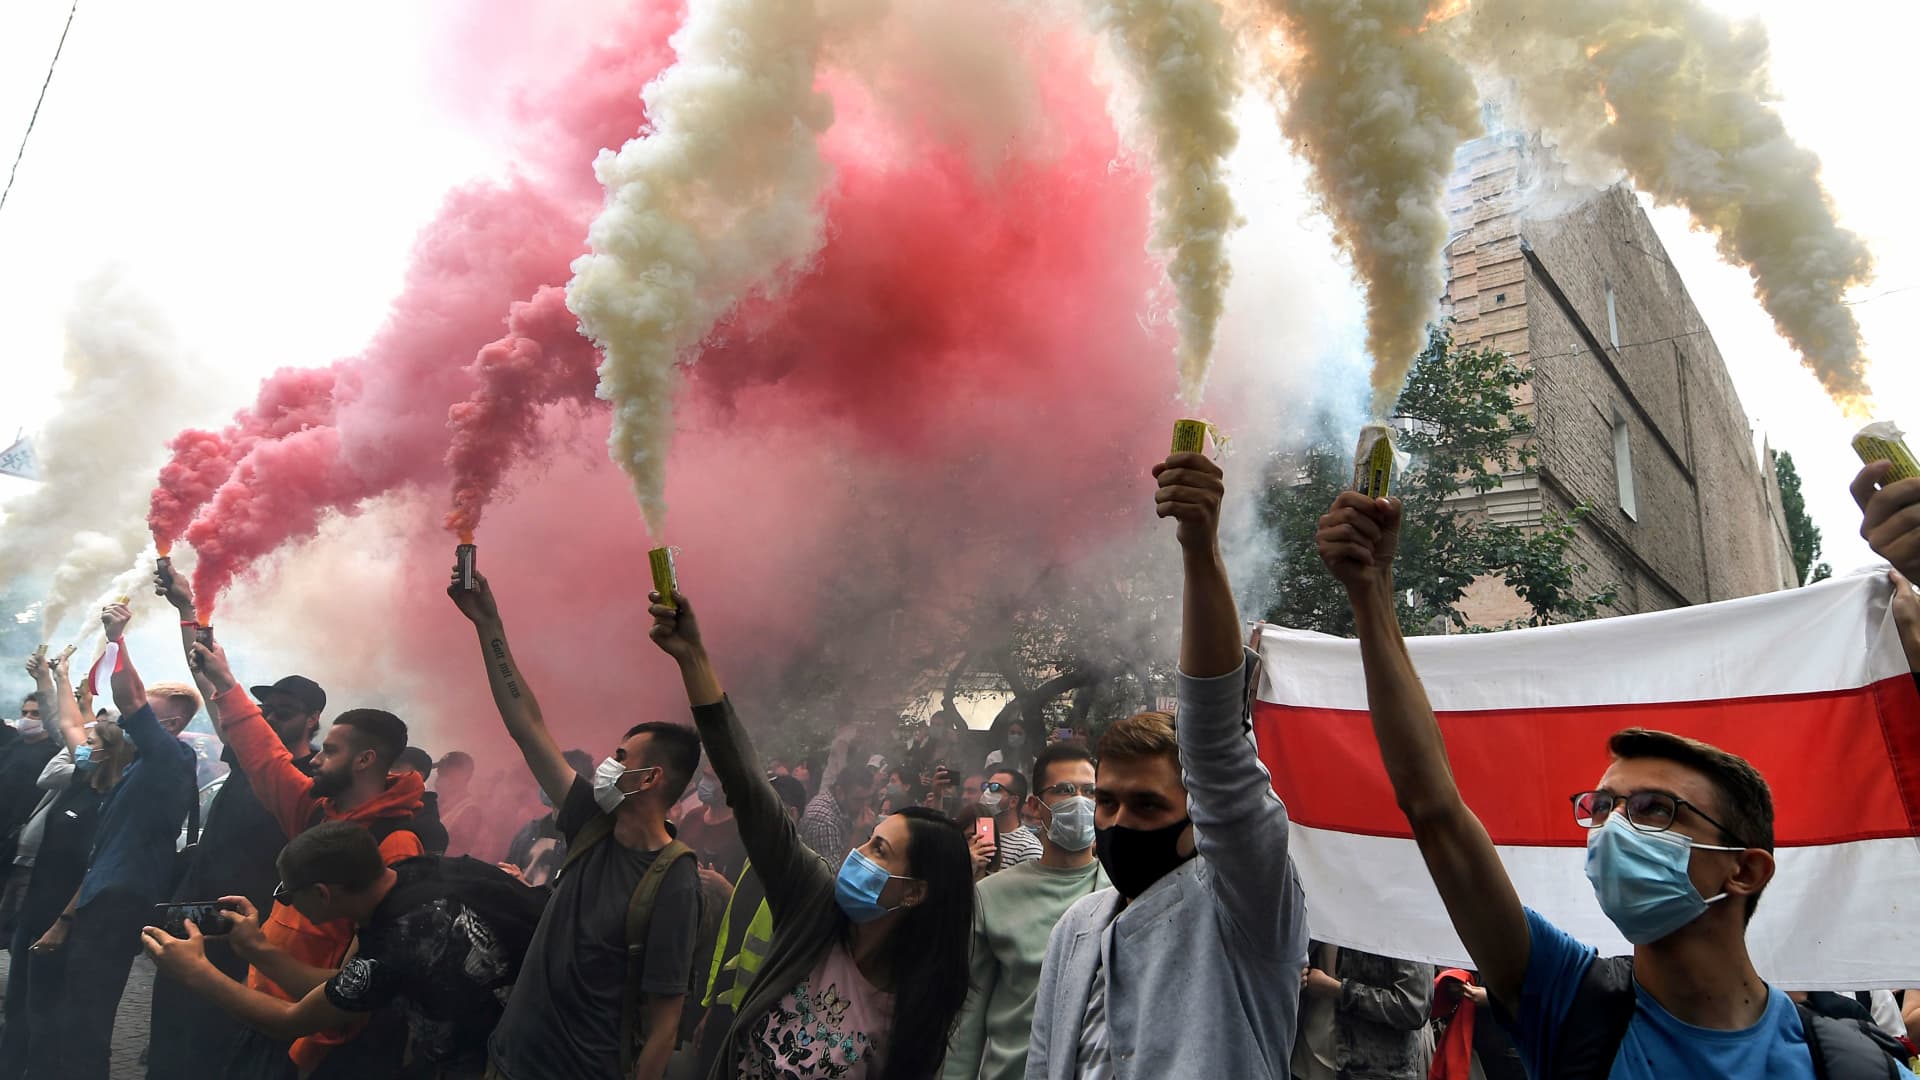 Members of the Belarus diaspora and Ukrainian activists burn white and red smoke grenades during a rally in support of Belarus people protesting vote rigging in the presidential election, outside the Belarusian embassy in Kiev on August 13, 2020.